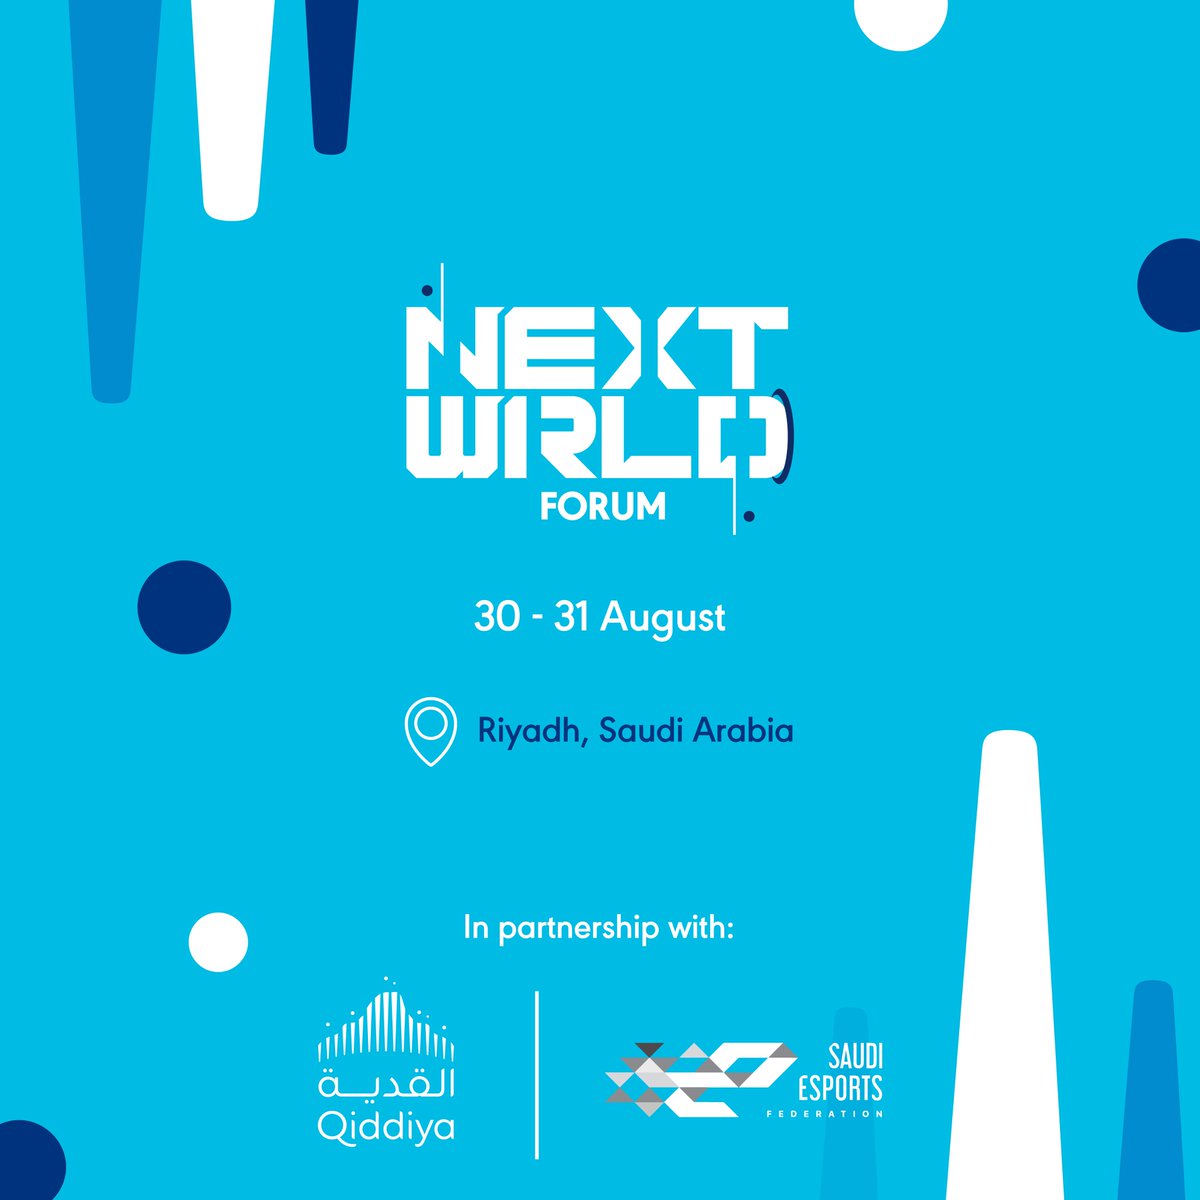 Experts and speakers from all around the gaming world have gathered in Riyadh for the #NextWorldForum to discuss the most important topics relating to the gaming and Esports sector. Follow the forum's activities tomorrow through a livestream on this link: youtube.com/@nextworldforu…